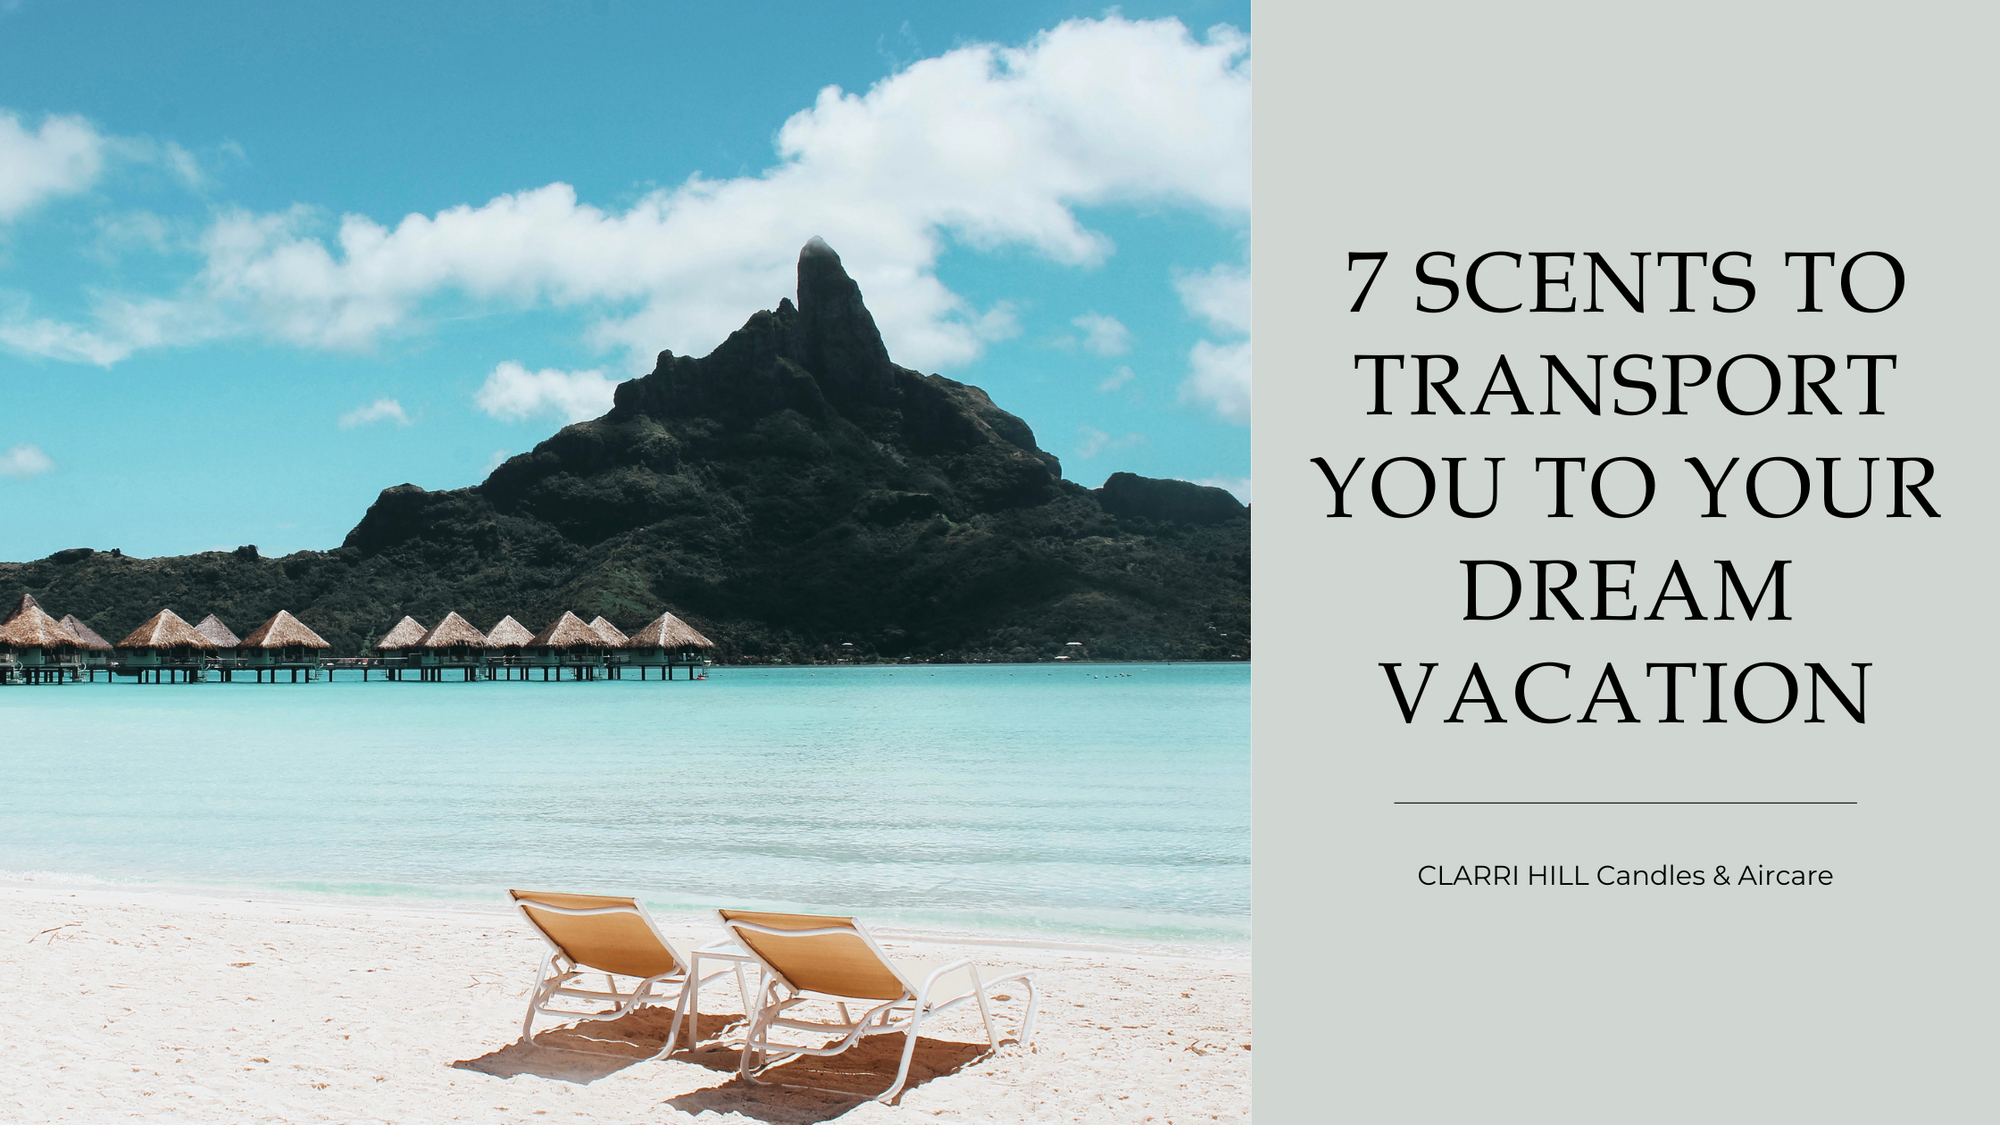 7 Scents to Transport You to Your Dream Vacation Destination